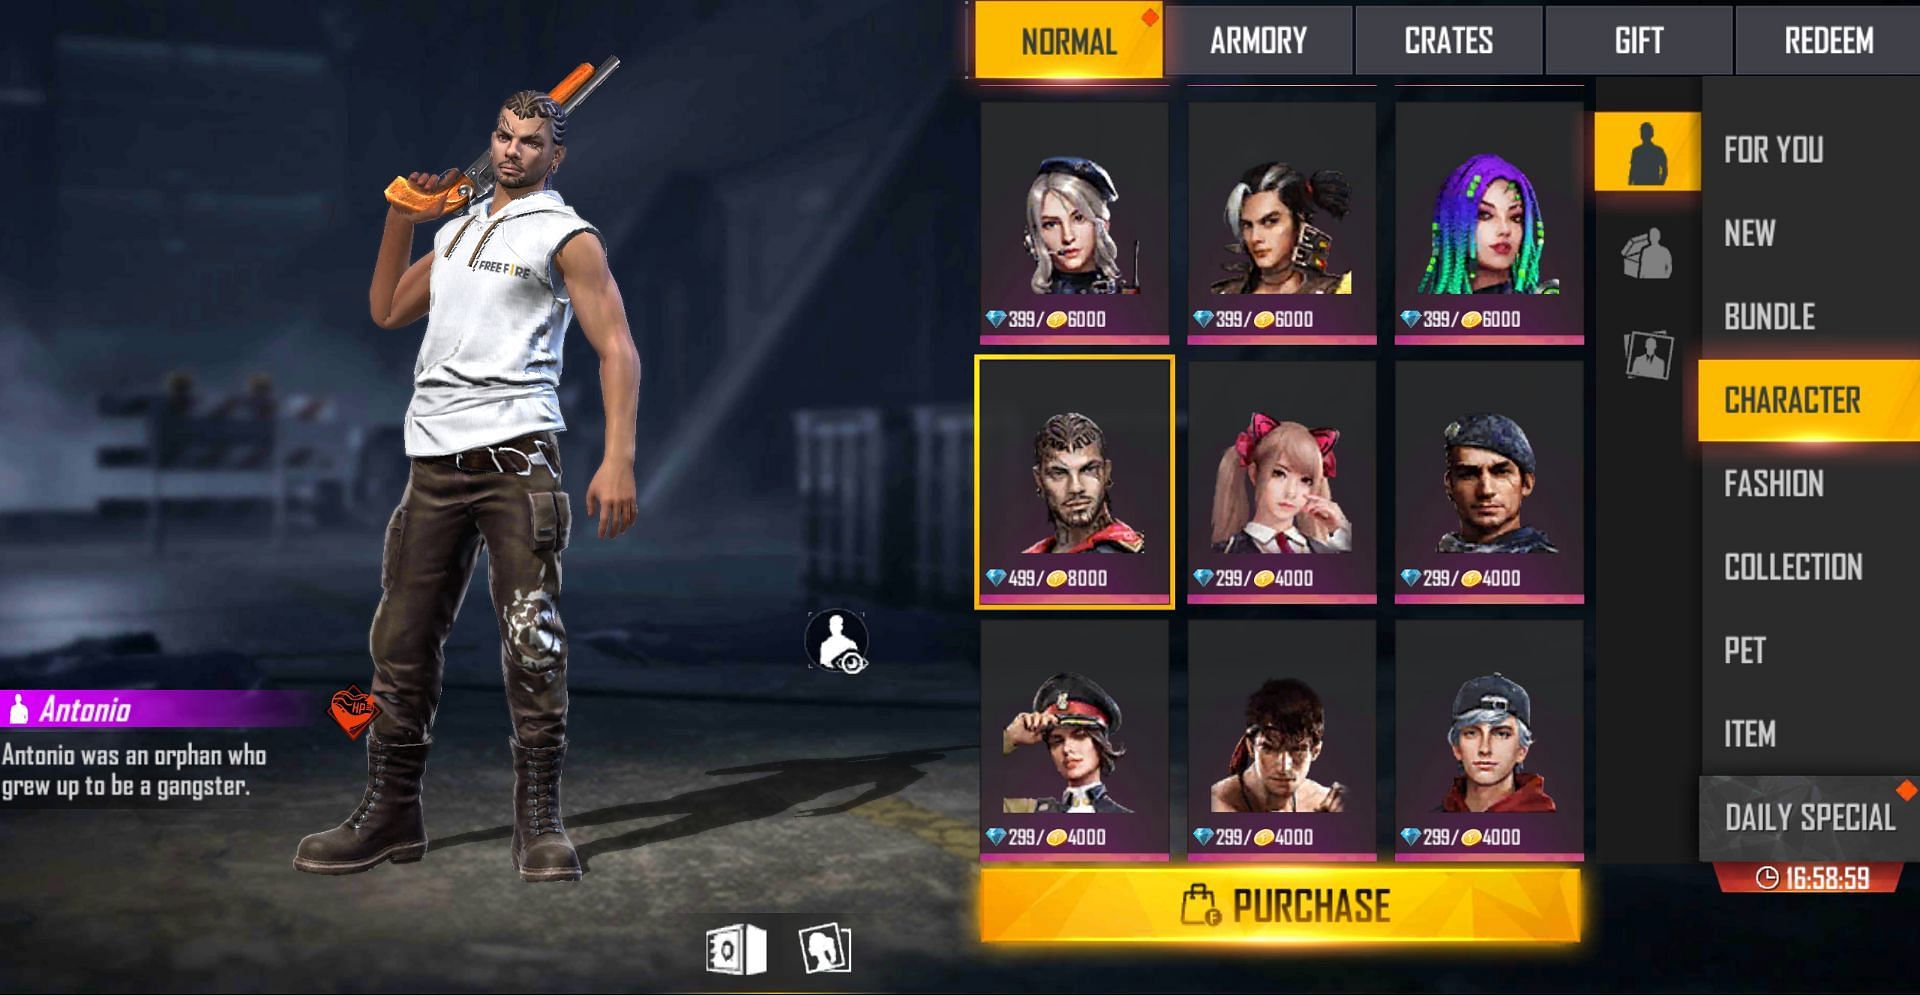 Antonio can be bought for 8000 gold at the moment (Image via Free Fire)